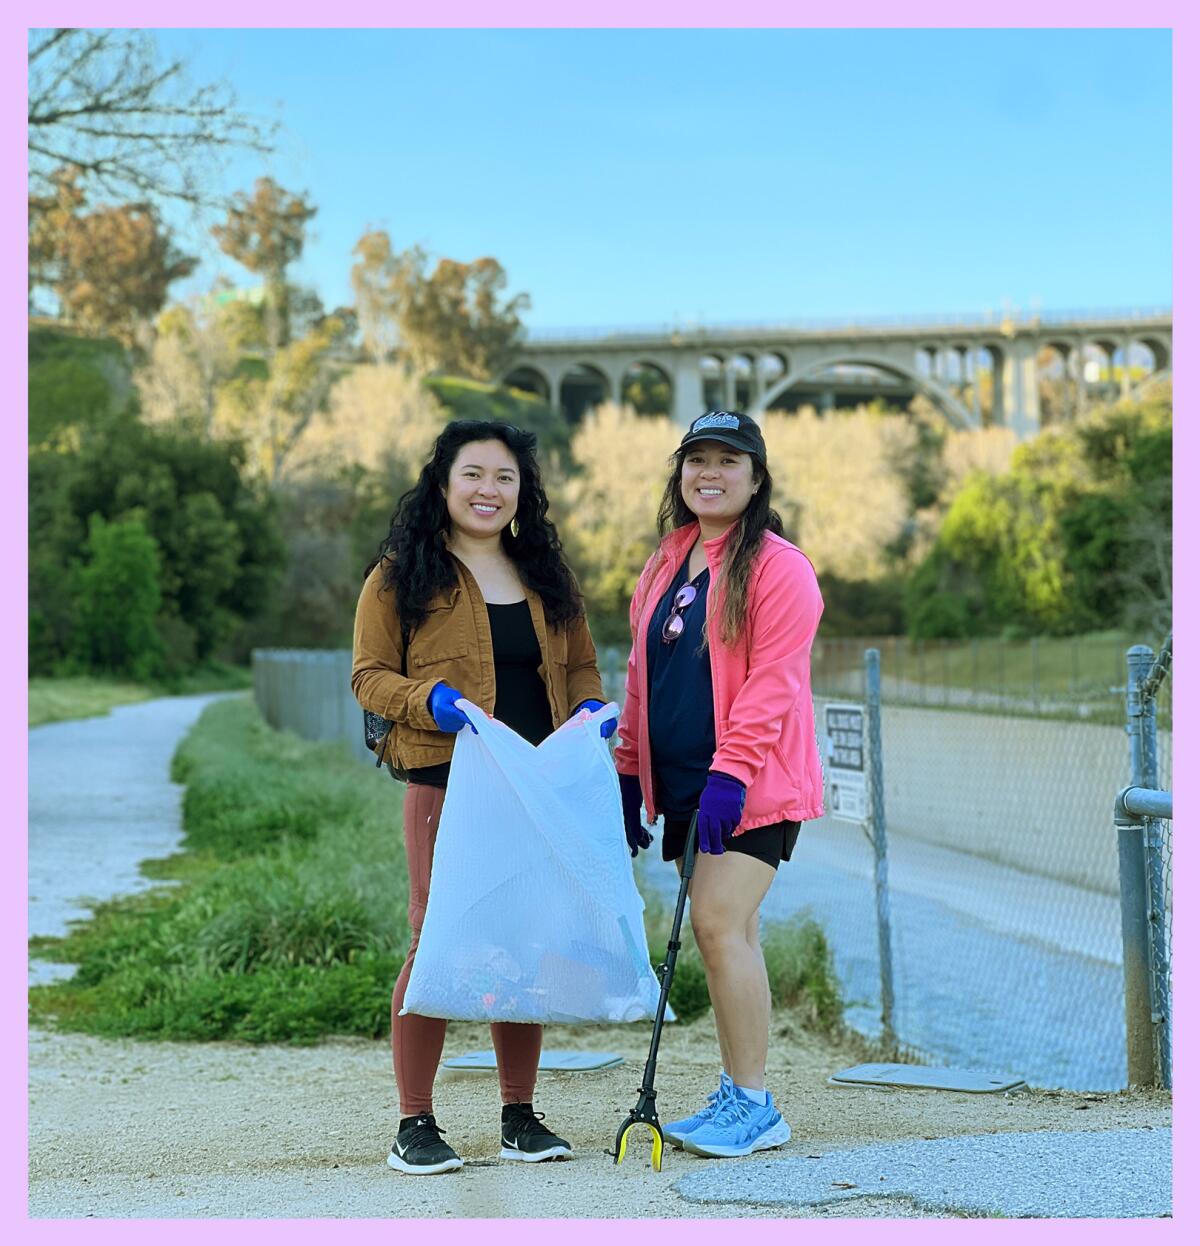 Kelly Villasor wears a tan jacket and holds a trash bag. Christy Villasor stands next to her in pink holding a trash picker.